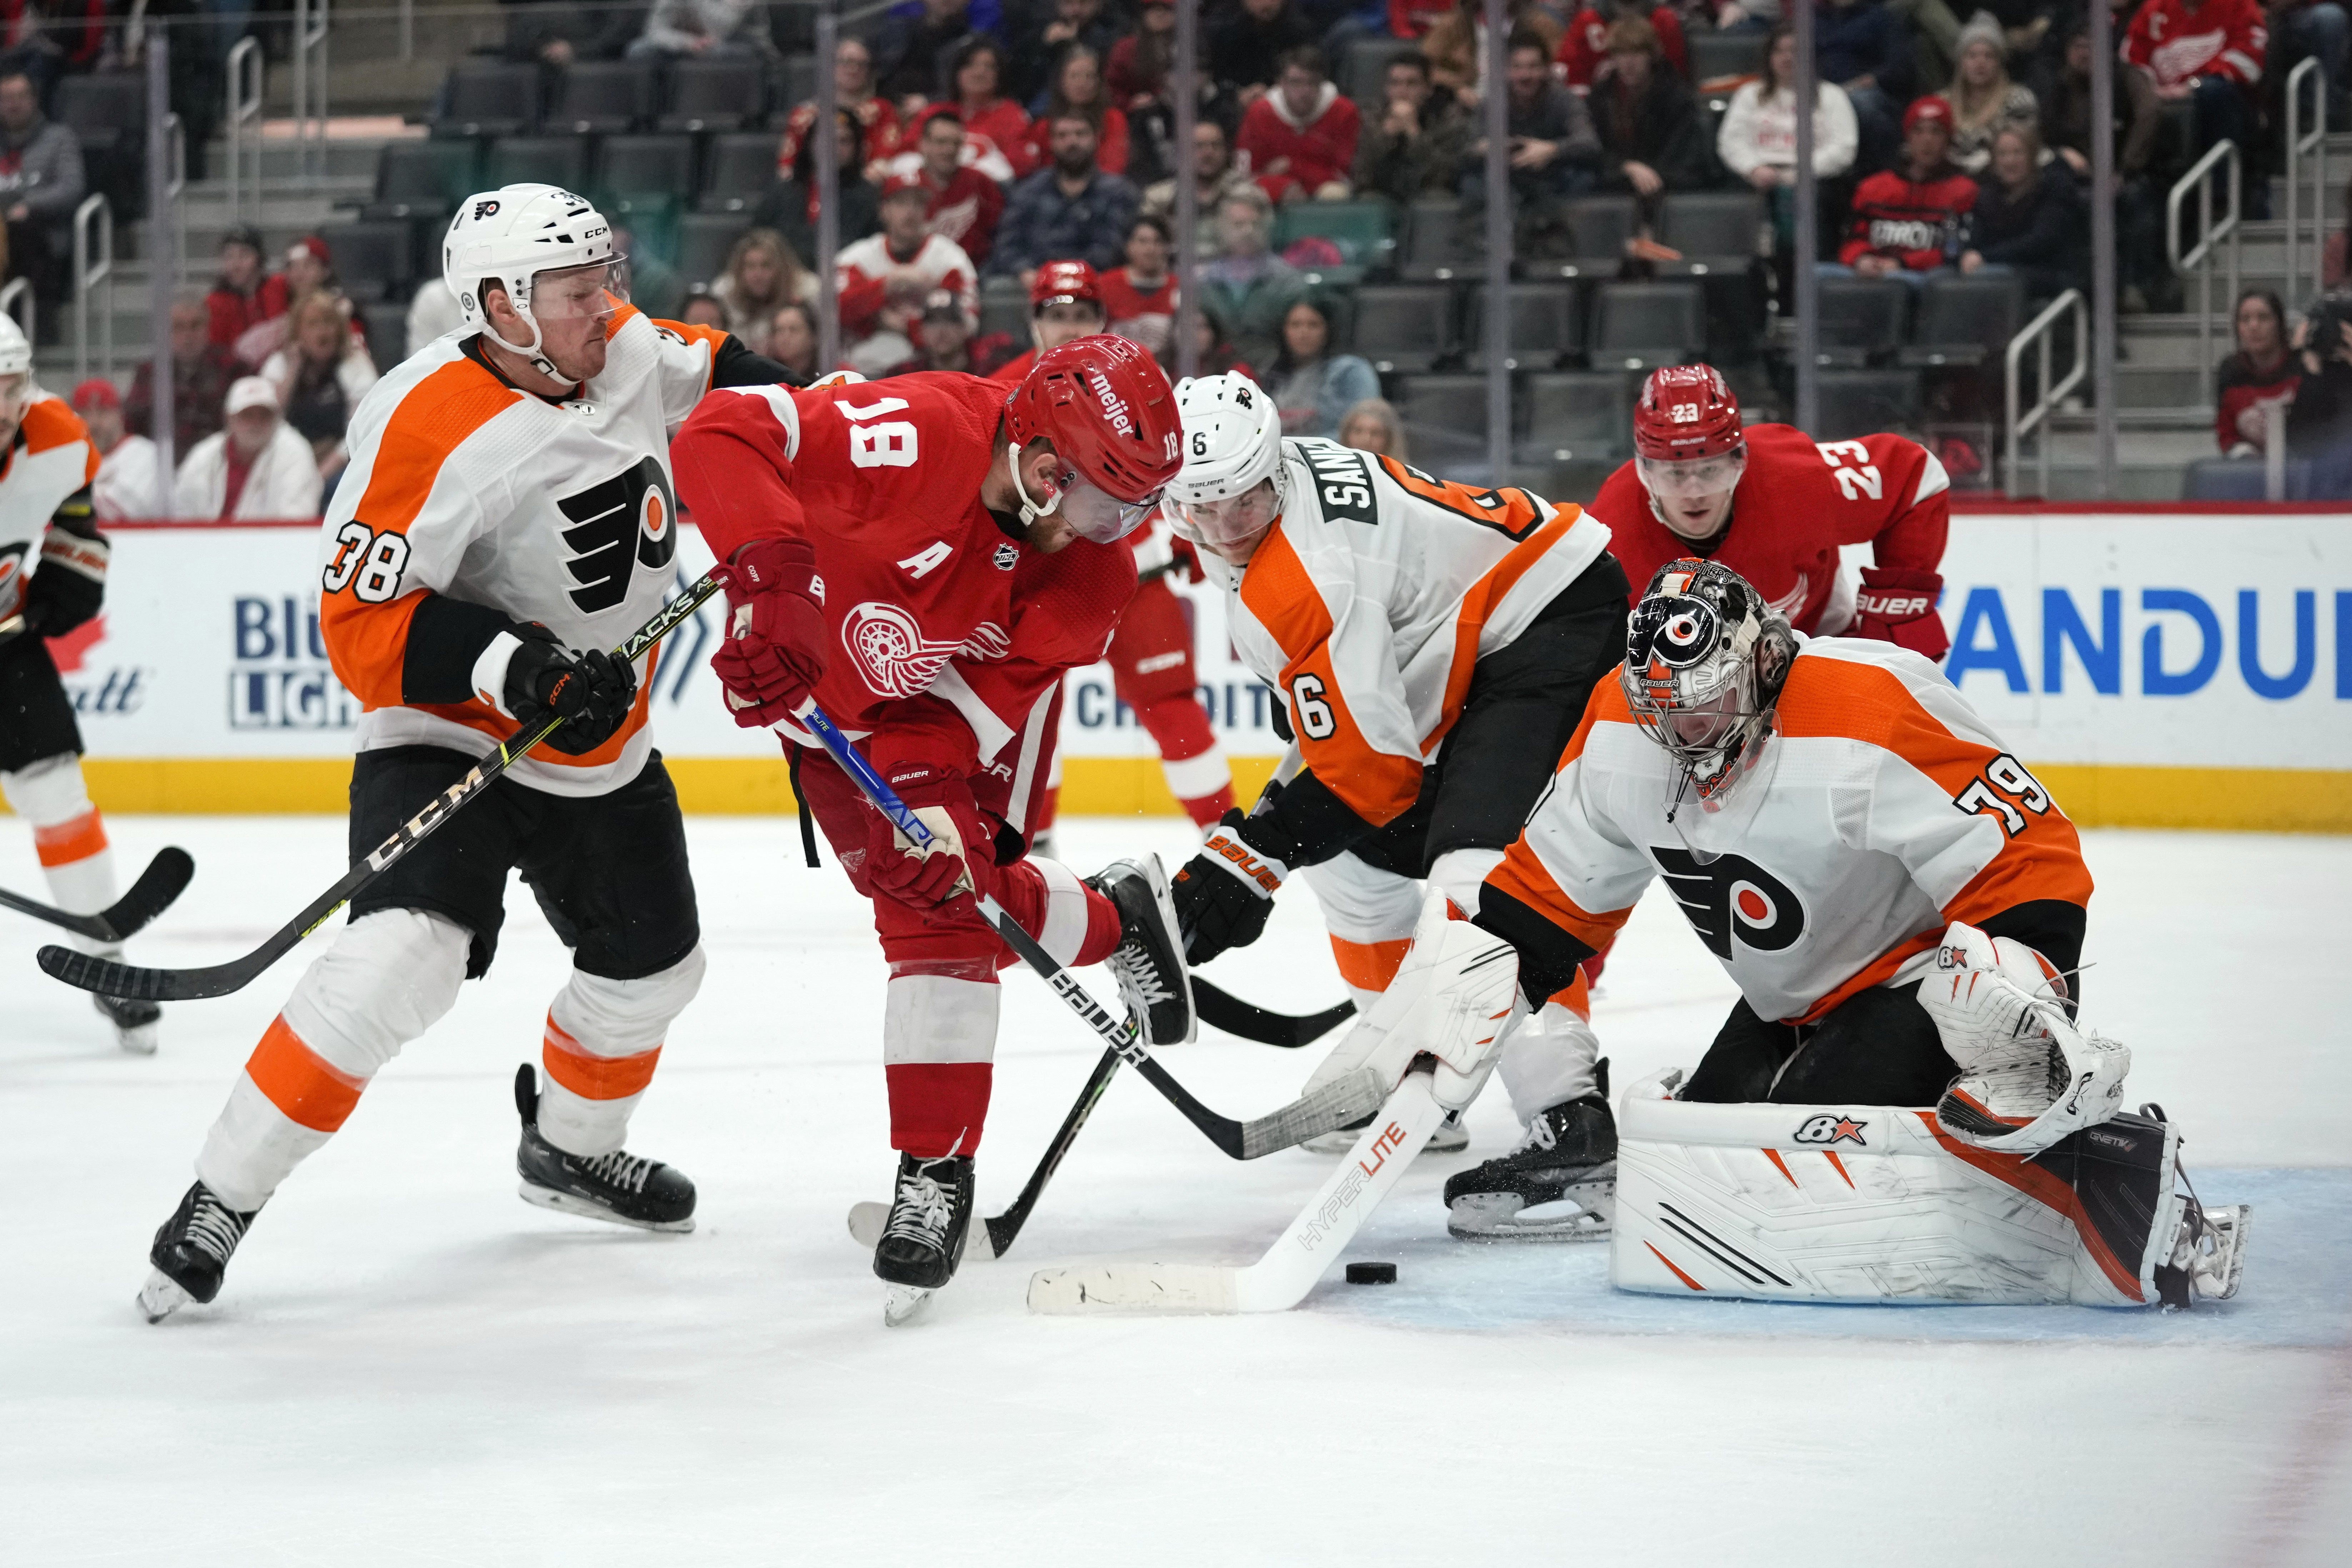 Detroit Red Wings loses to Philadelphia Flyers, 3-1: Game thread replay